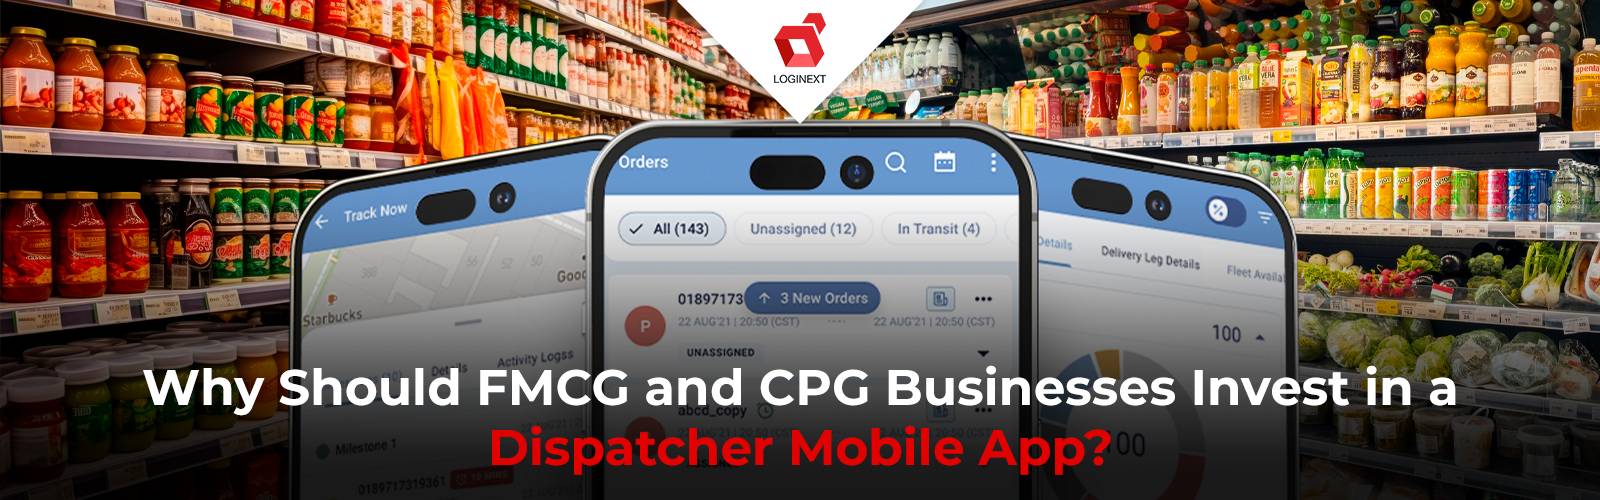 Why should CPG and FMCG businesses invest in dispatcher mobile app?